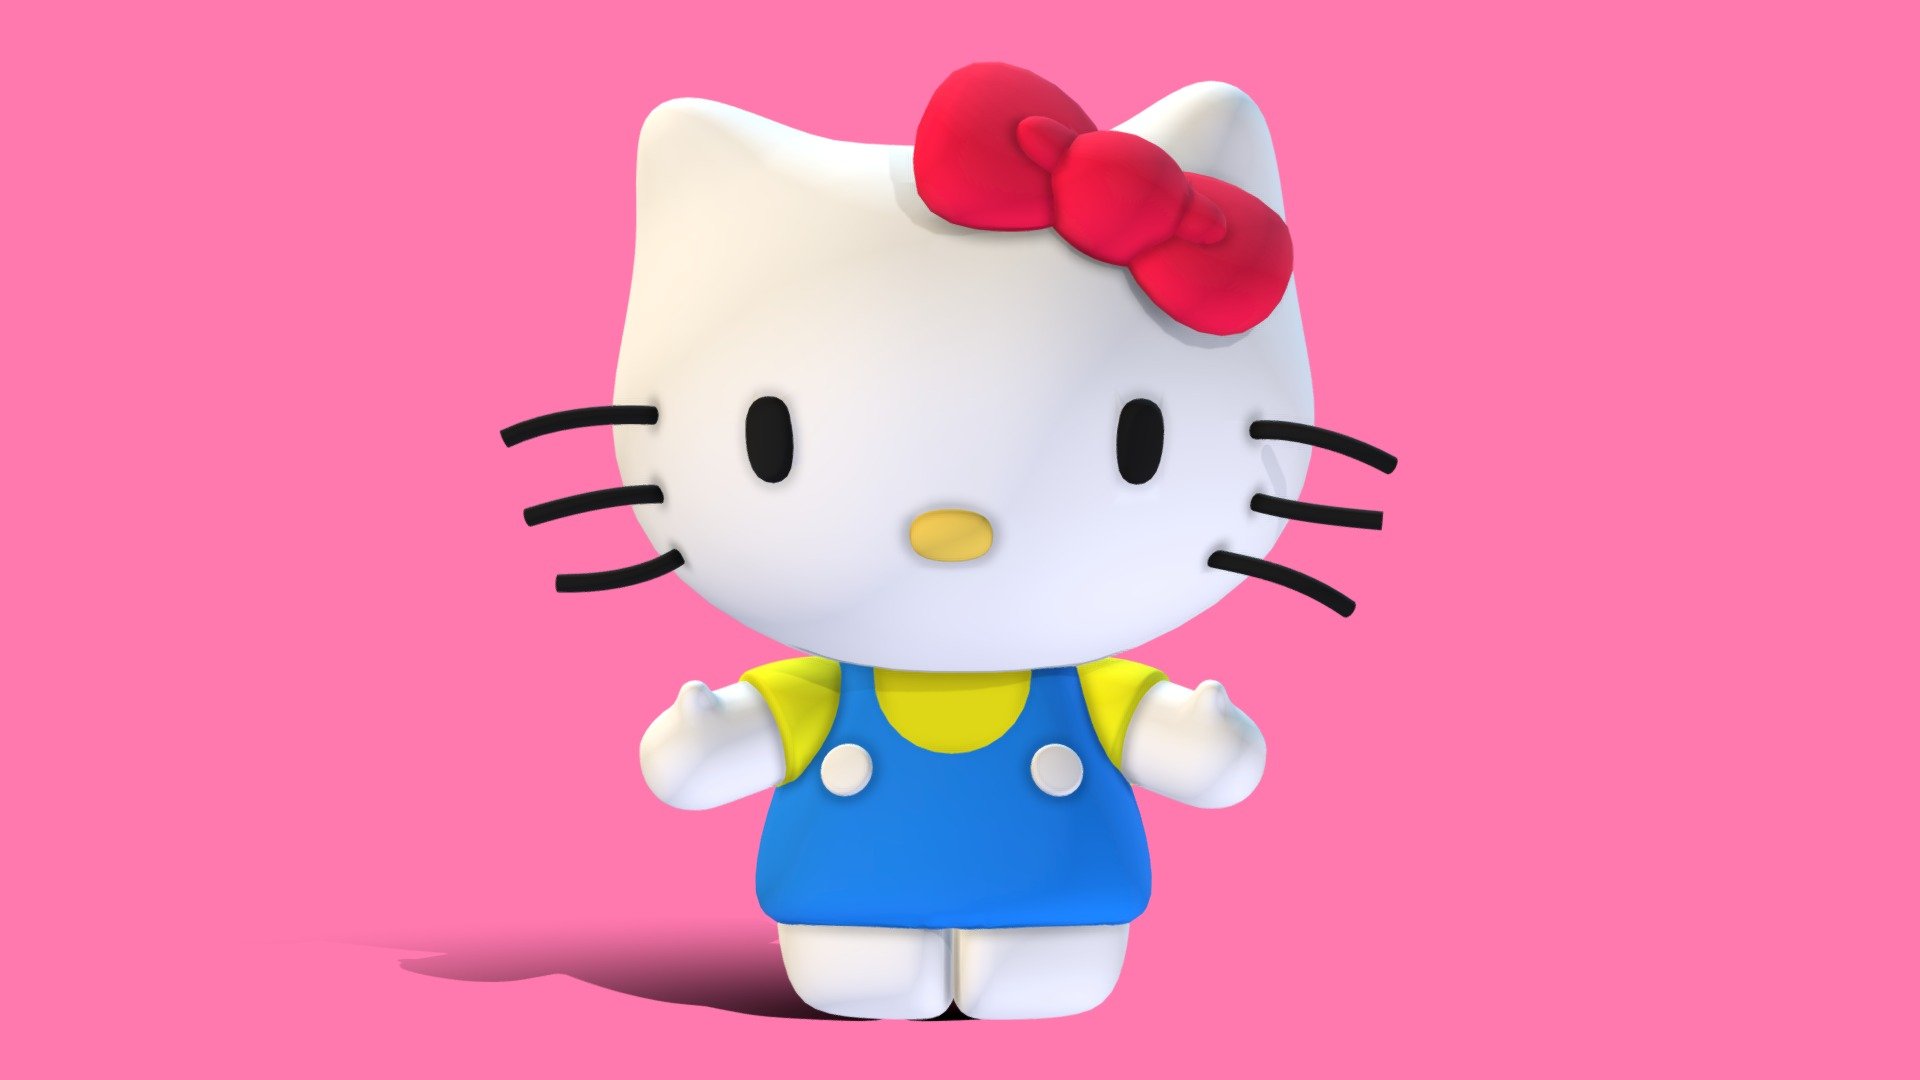 A simple and cute 3D model of the popular and iconic Sanrio character Hello Kitty.

File Formats





FBX




glTF 




OBJ




STL




Native 3.5 Blender File



STL is recomended for 3D printing

Rigged

Polygons:
15,814

Vertices:
7,919 - Sanrio Hello Kitty 3D Model - Buy Royalty Free 3D model by SirSquiggles 3d model